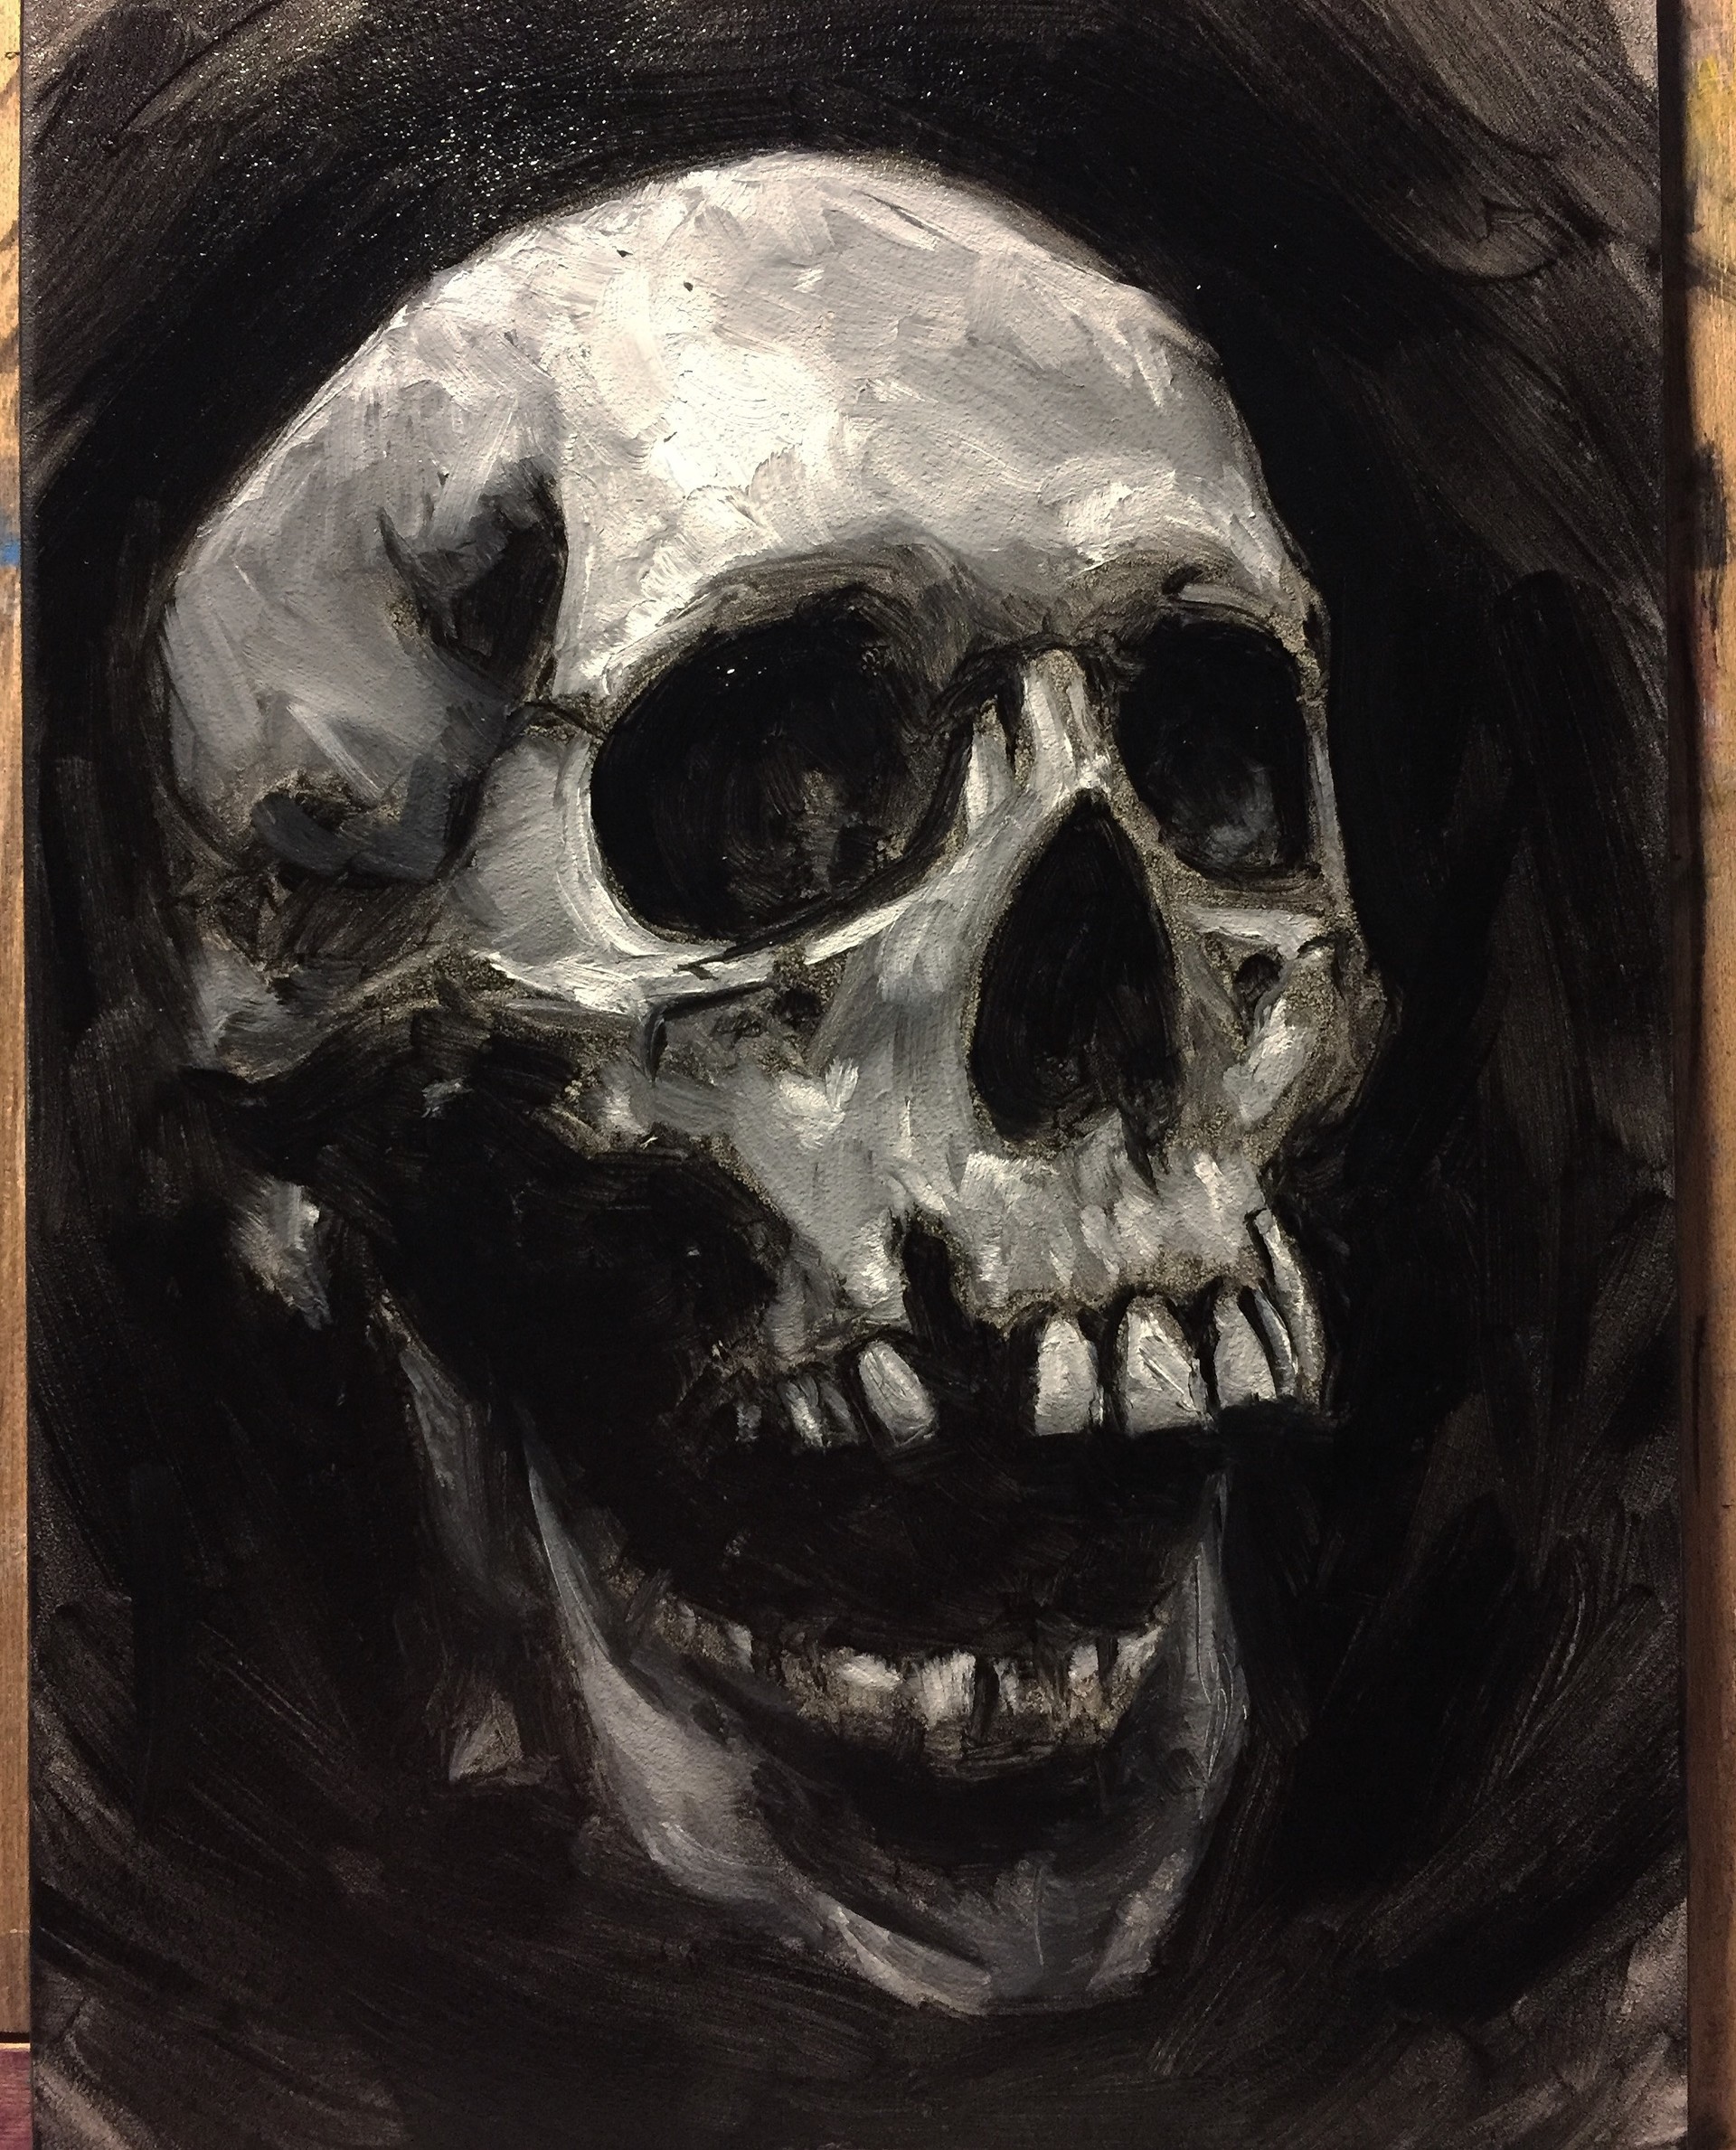 Some (mostly) recent paintings, including a skull study, a still